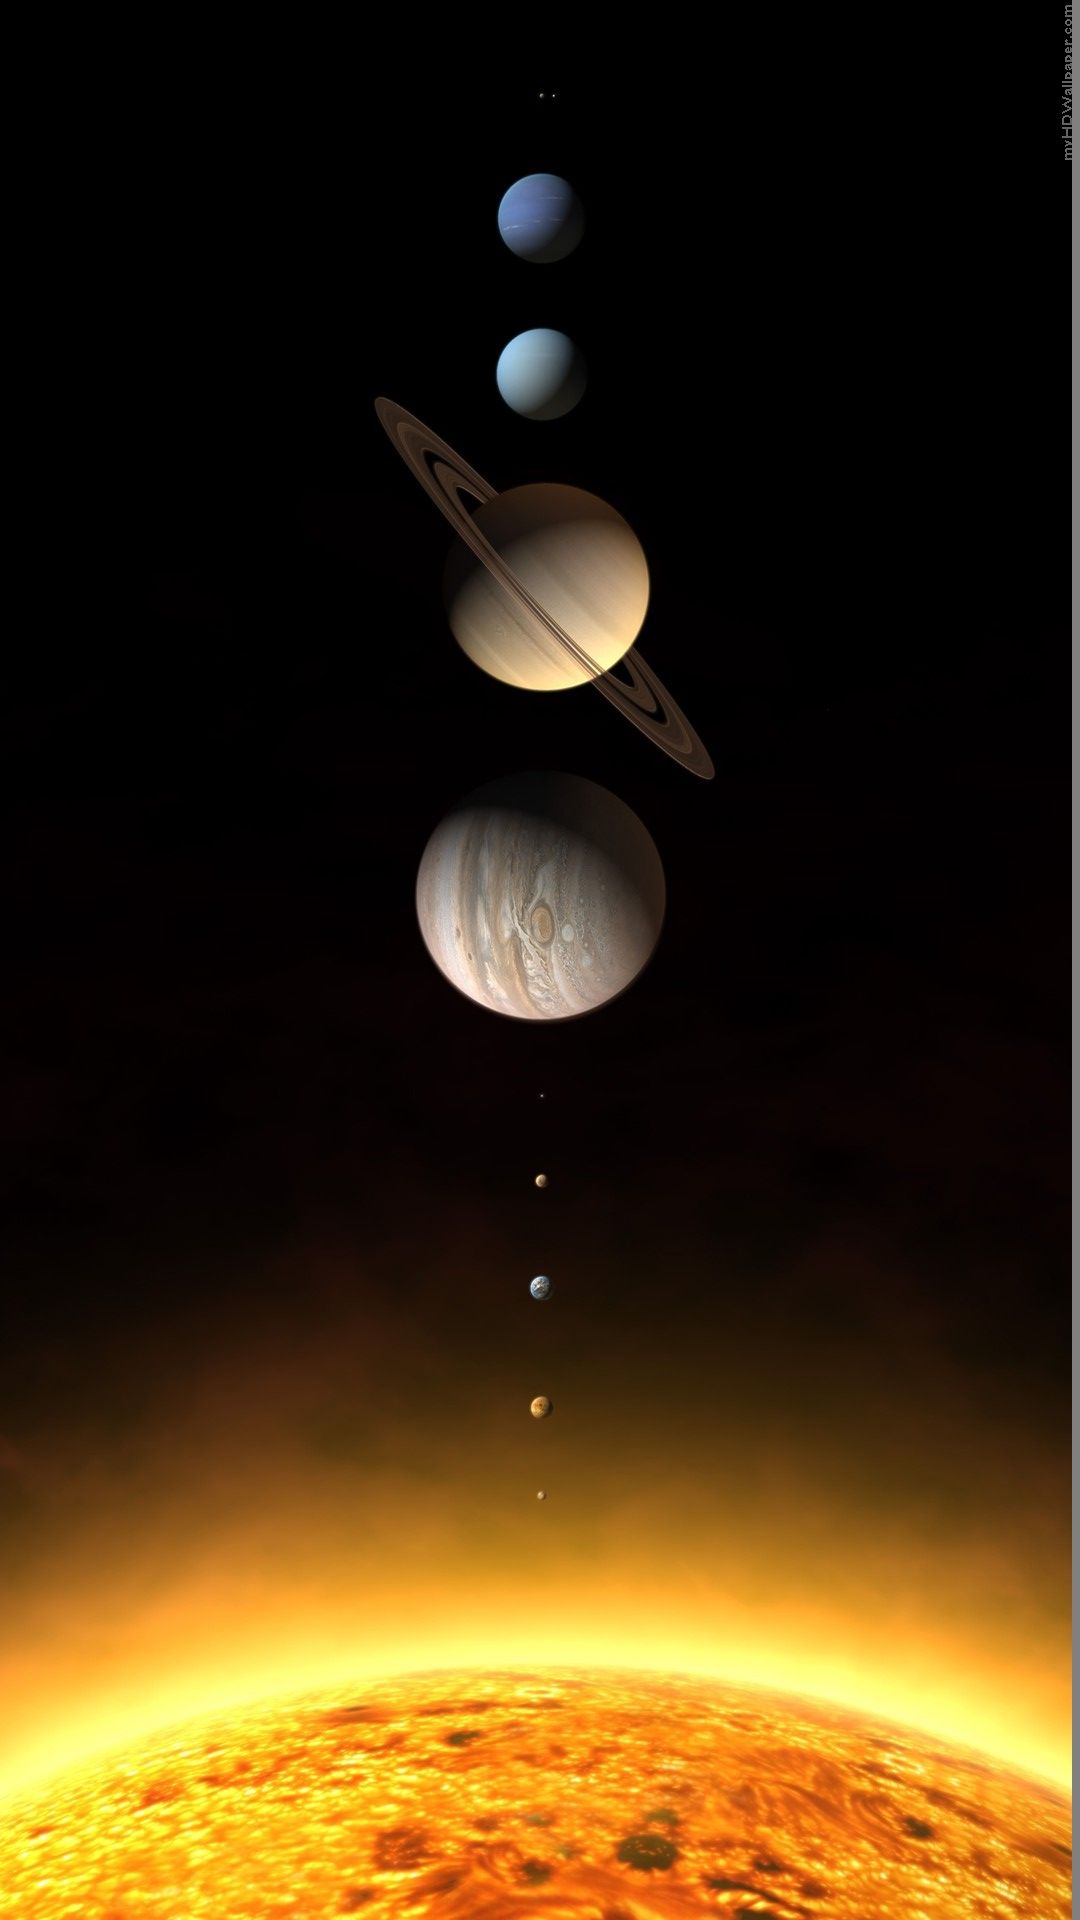 Realistic Solar System Planets Rendering iPhone 8 Wallpaper Free